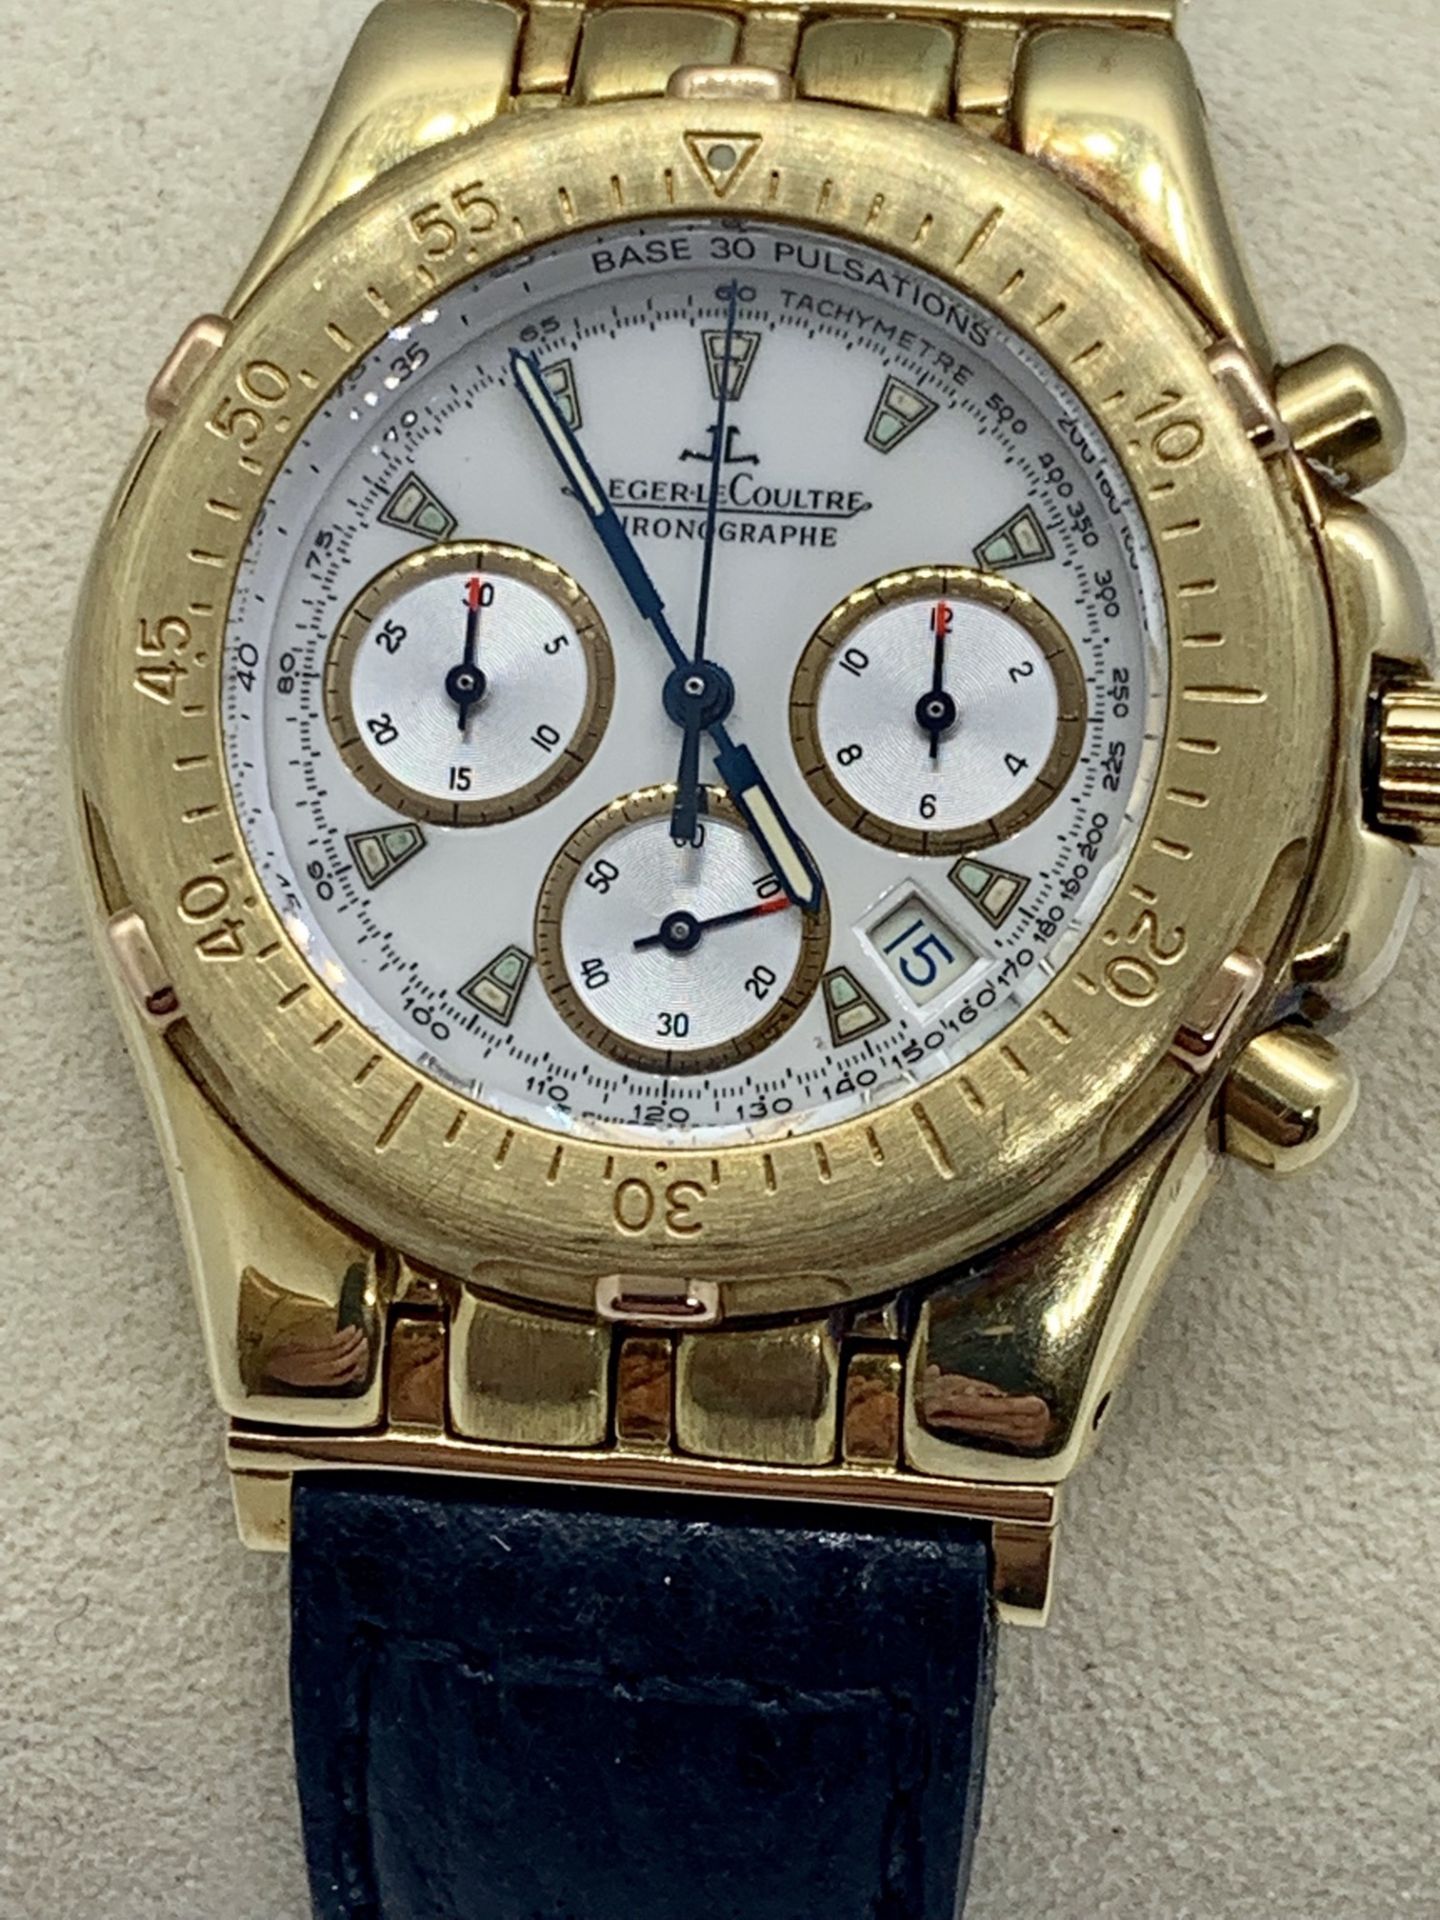 JAEGER LECOULTRE CHRONOGRAPH YELLOW GOLD WATCH - Image 3 of 6